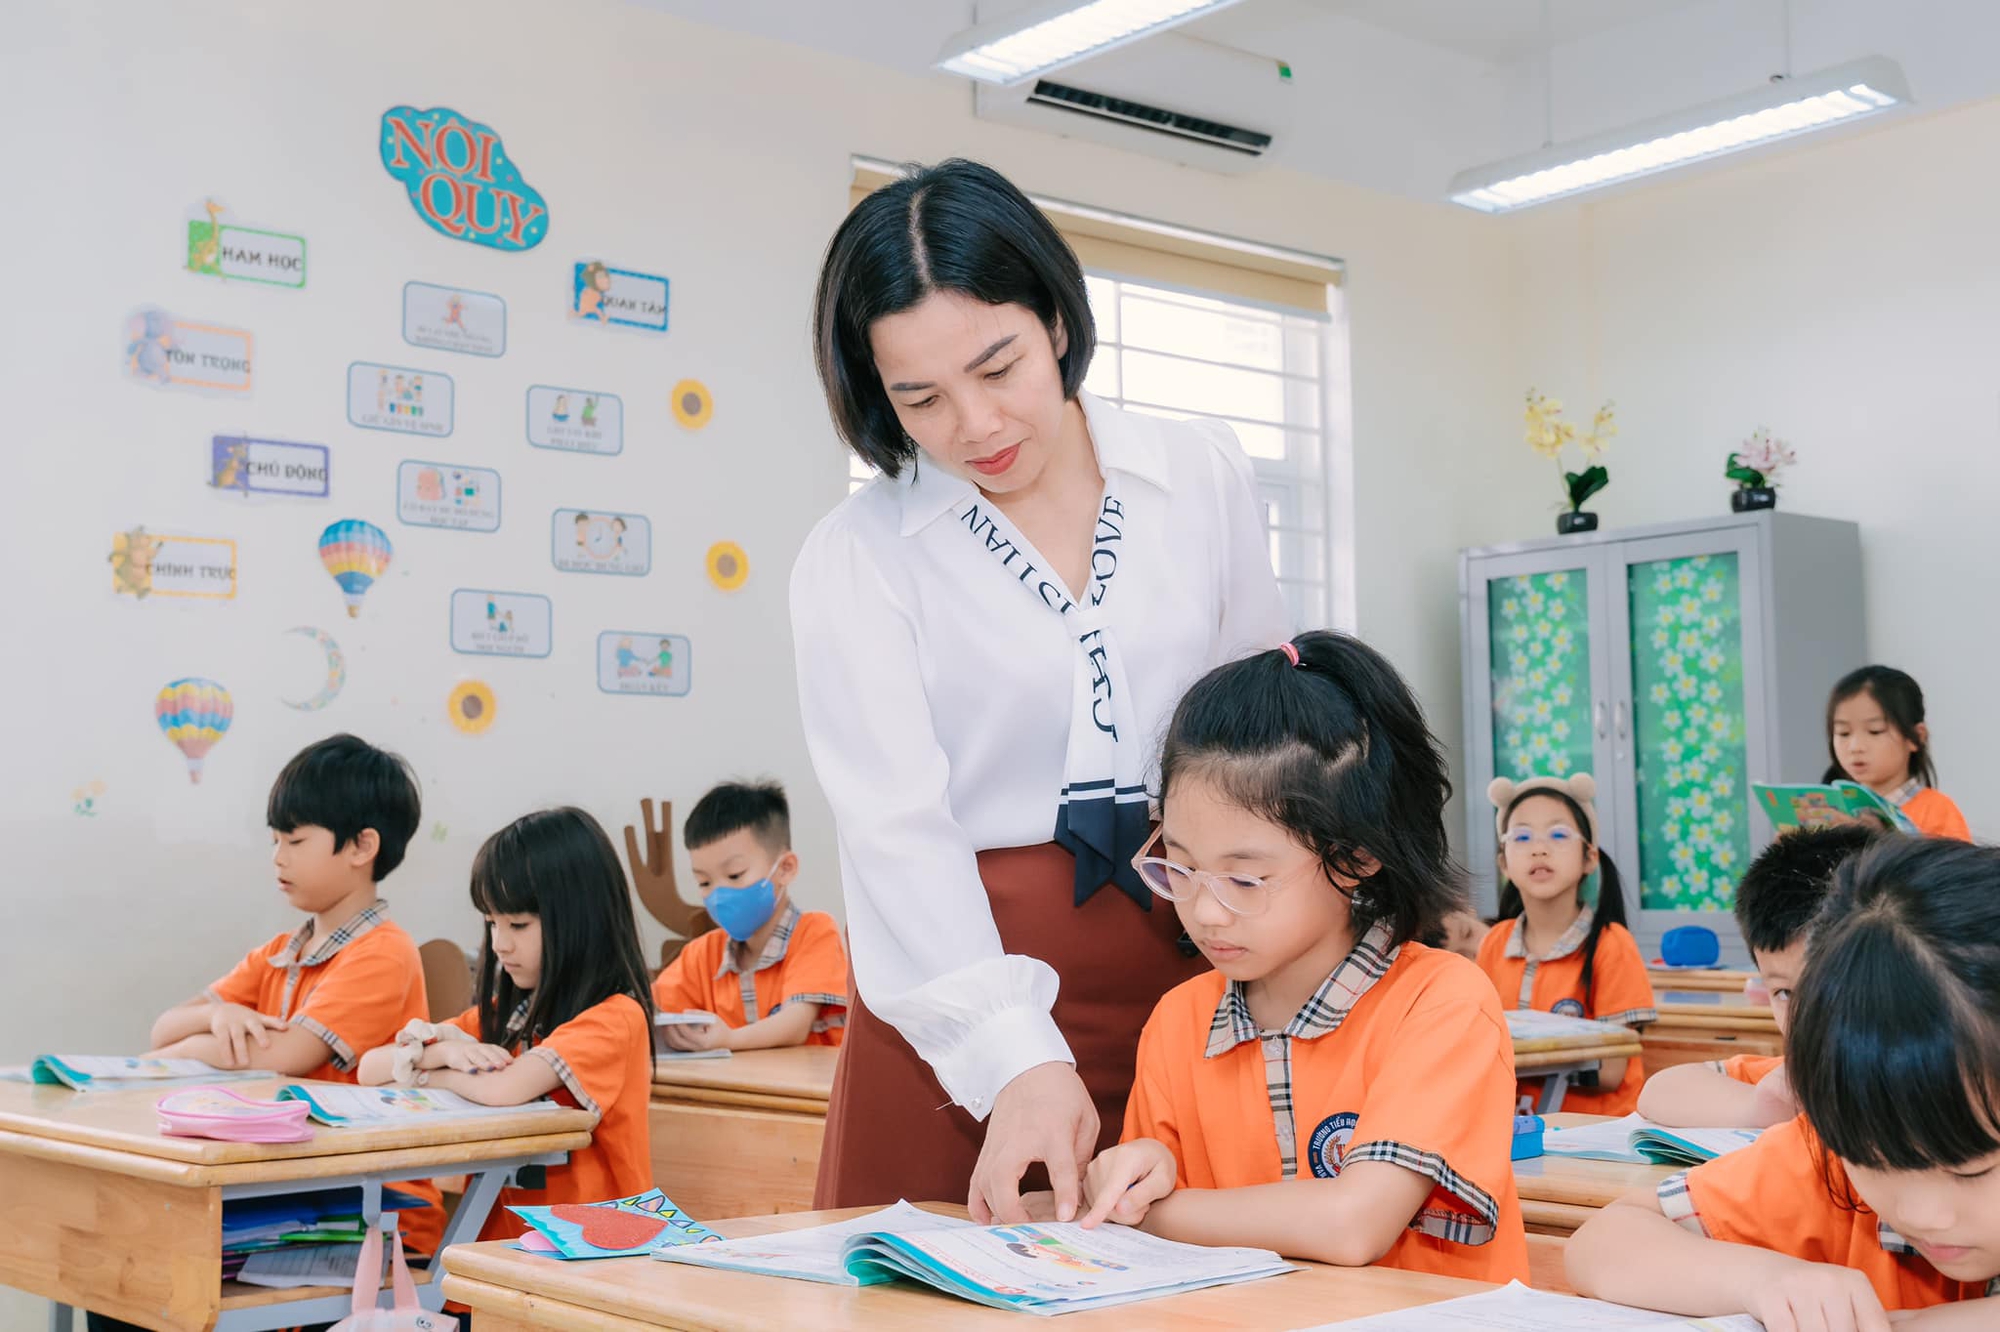 List of leadership and management positions in educational institutions in Vietnam 